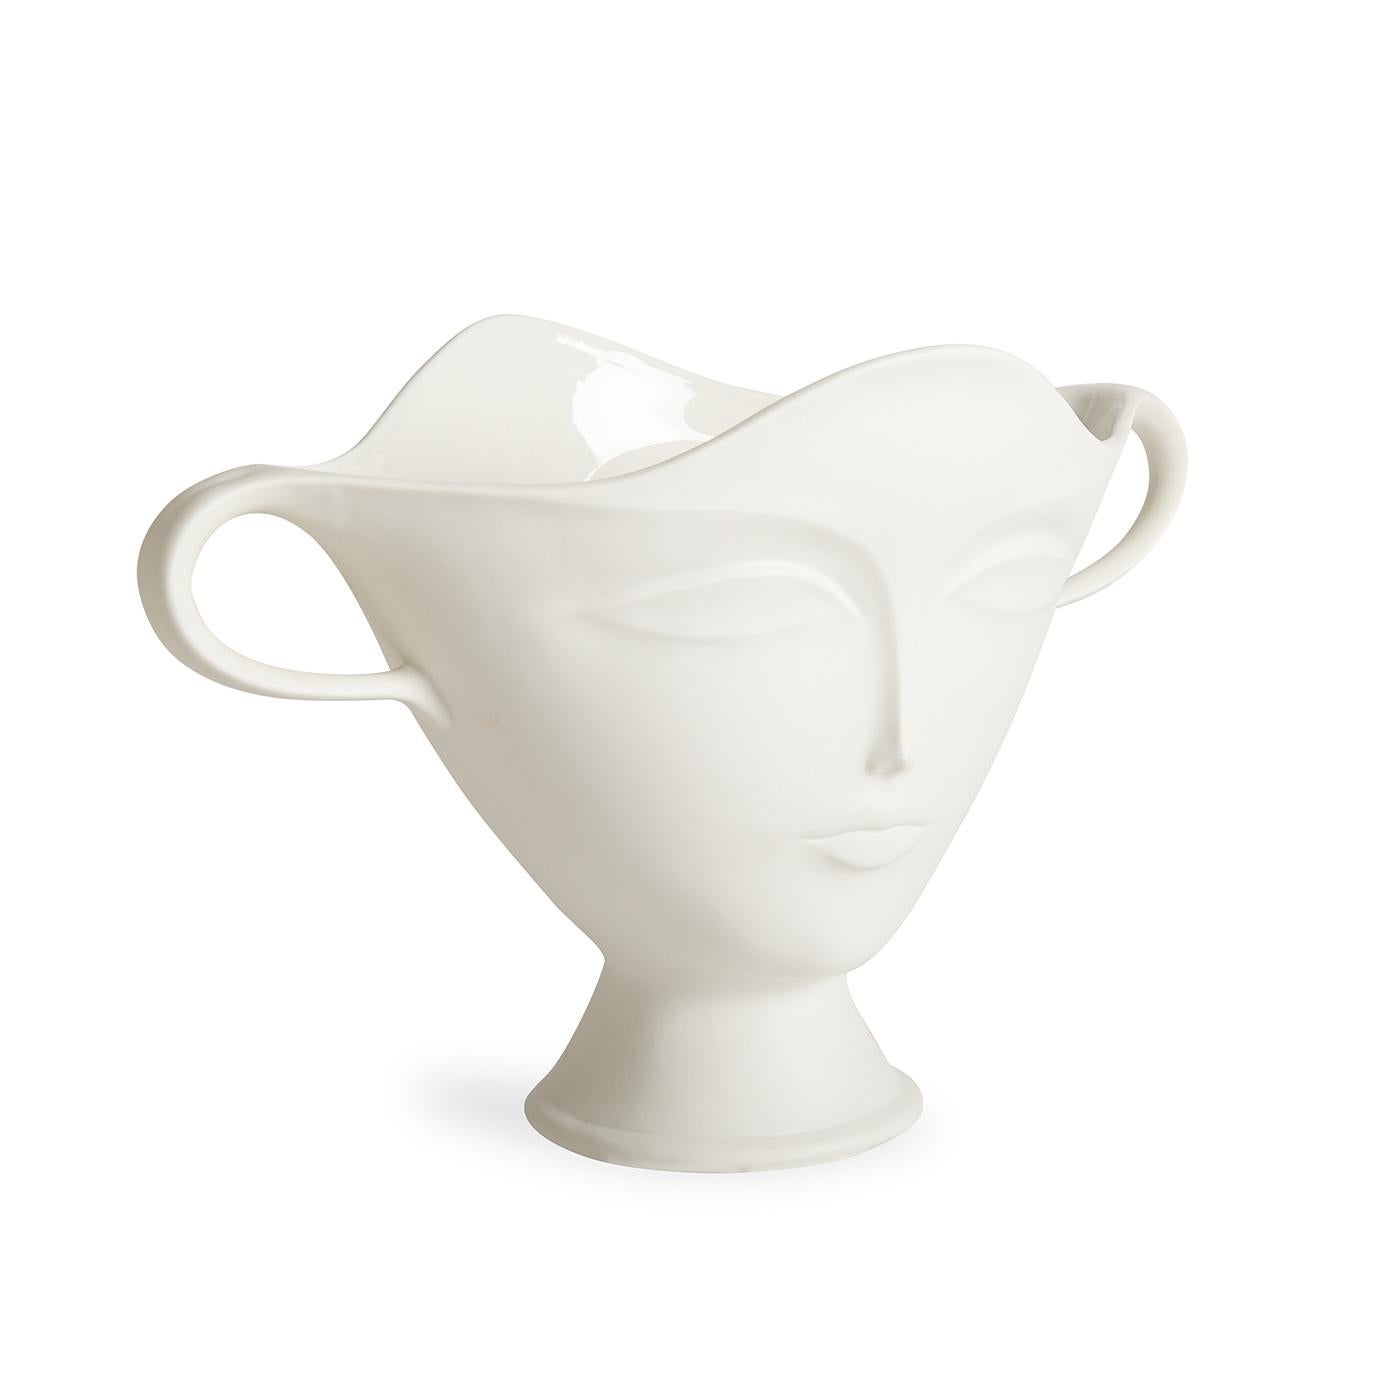 Divine detail. Take your tablescape from so-so to sublime. Made from white porcelain with a matte finish and clear interior glaze, our spin on this traditional, flower-friendly vessel features our muse Giuliette's ethereal face on both front and